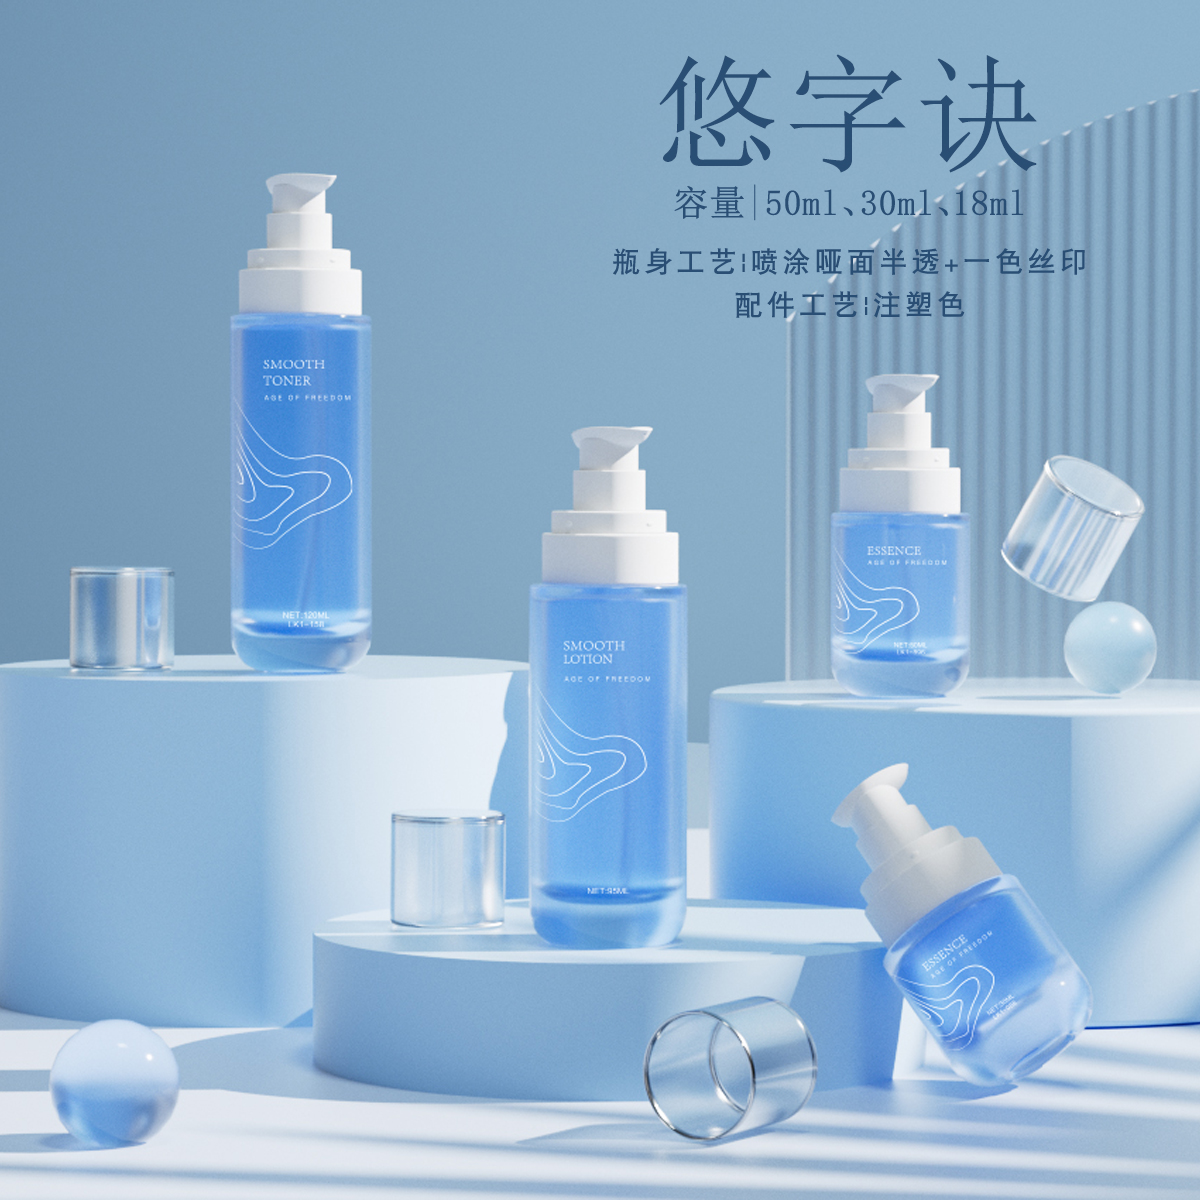 NWE PRODUCT LOTION-SERIE —'U'-SERIE